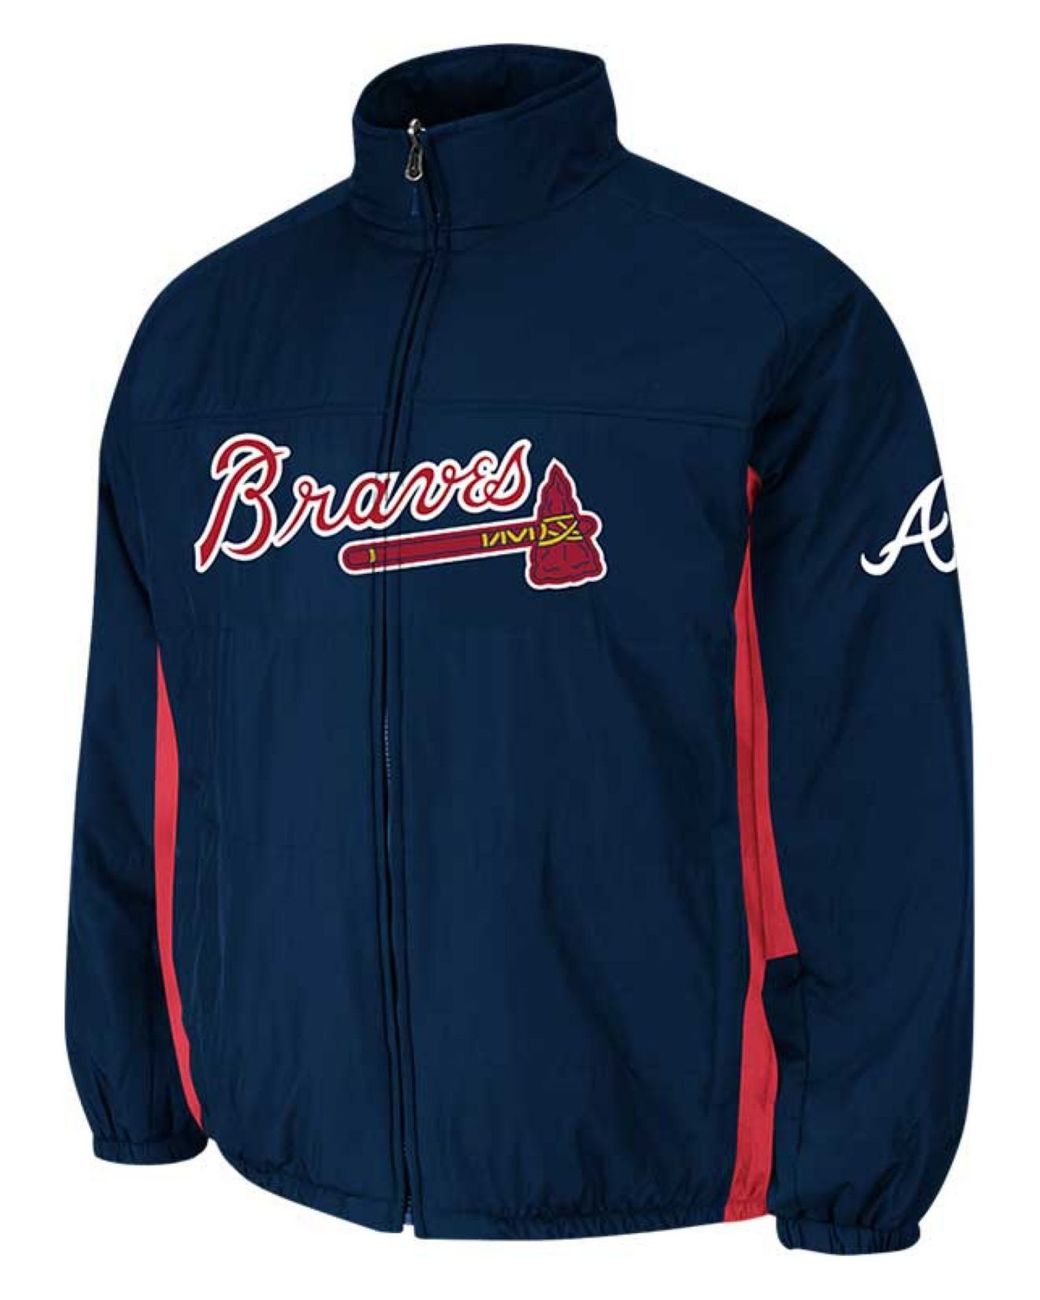 https://cdna.lystit.com/1040/1300/n/photos/502a-2014/12/02/majestic-red-mens-atlanta-braves-double-climate-on-field-full-zip-jacket-product-1-18616185-0-607173238-normal.jpeg